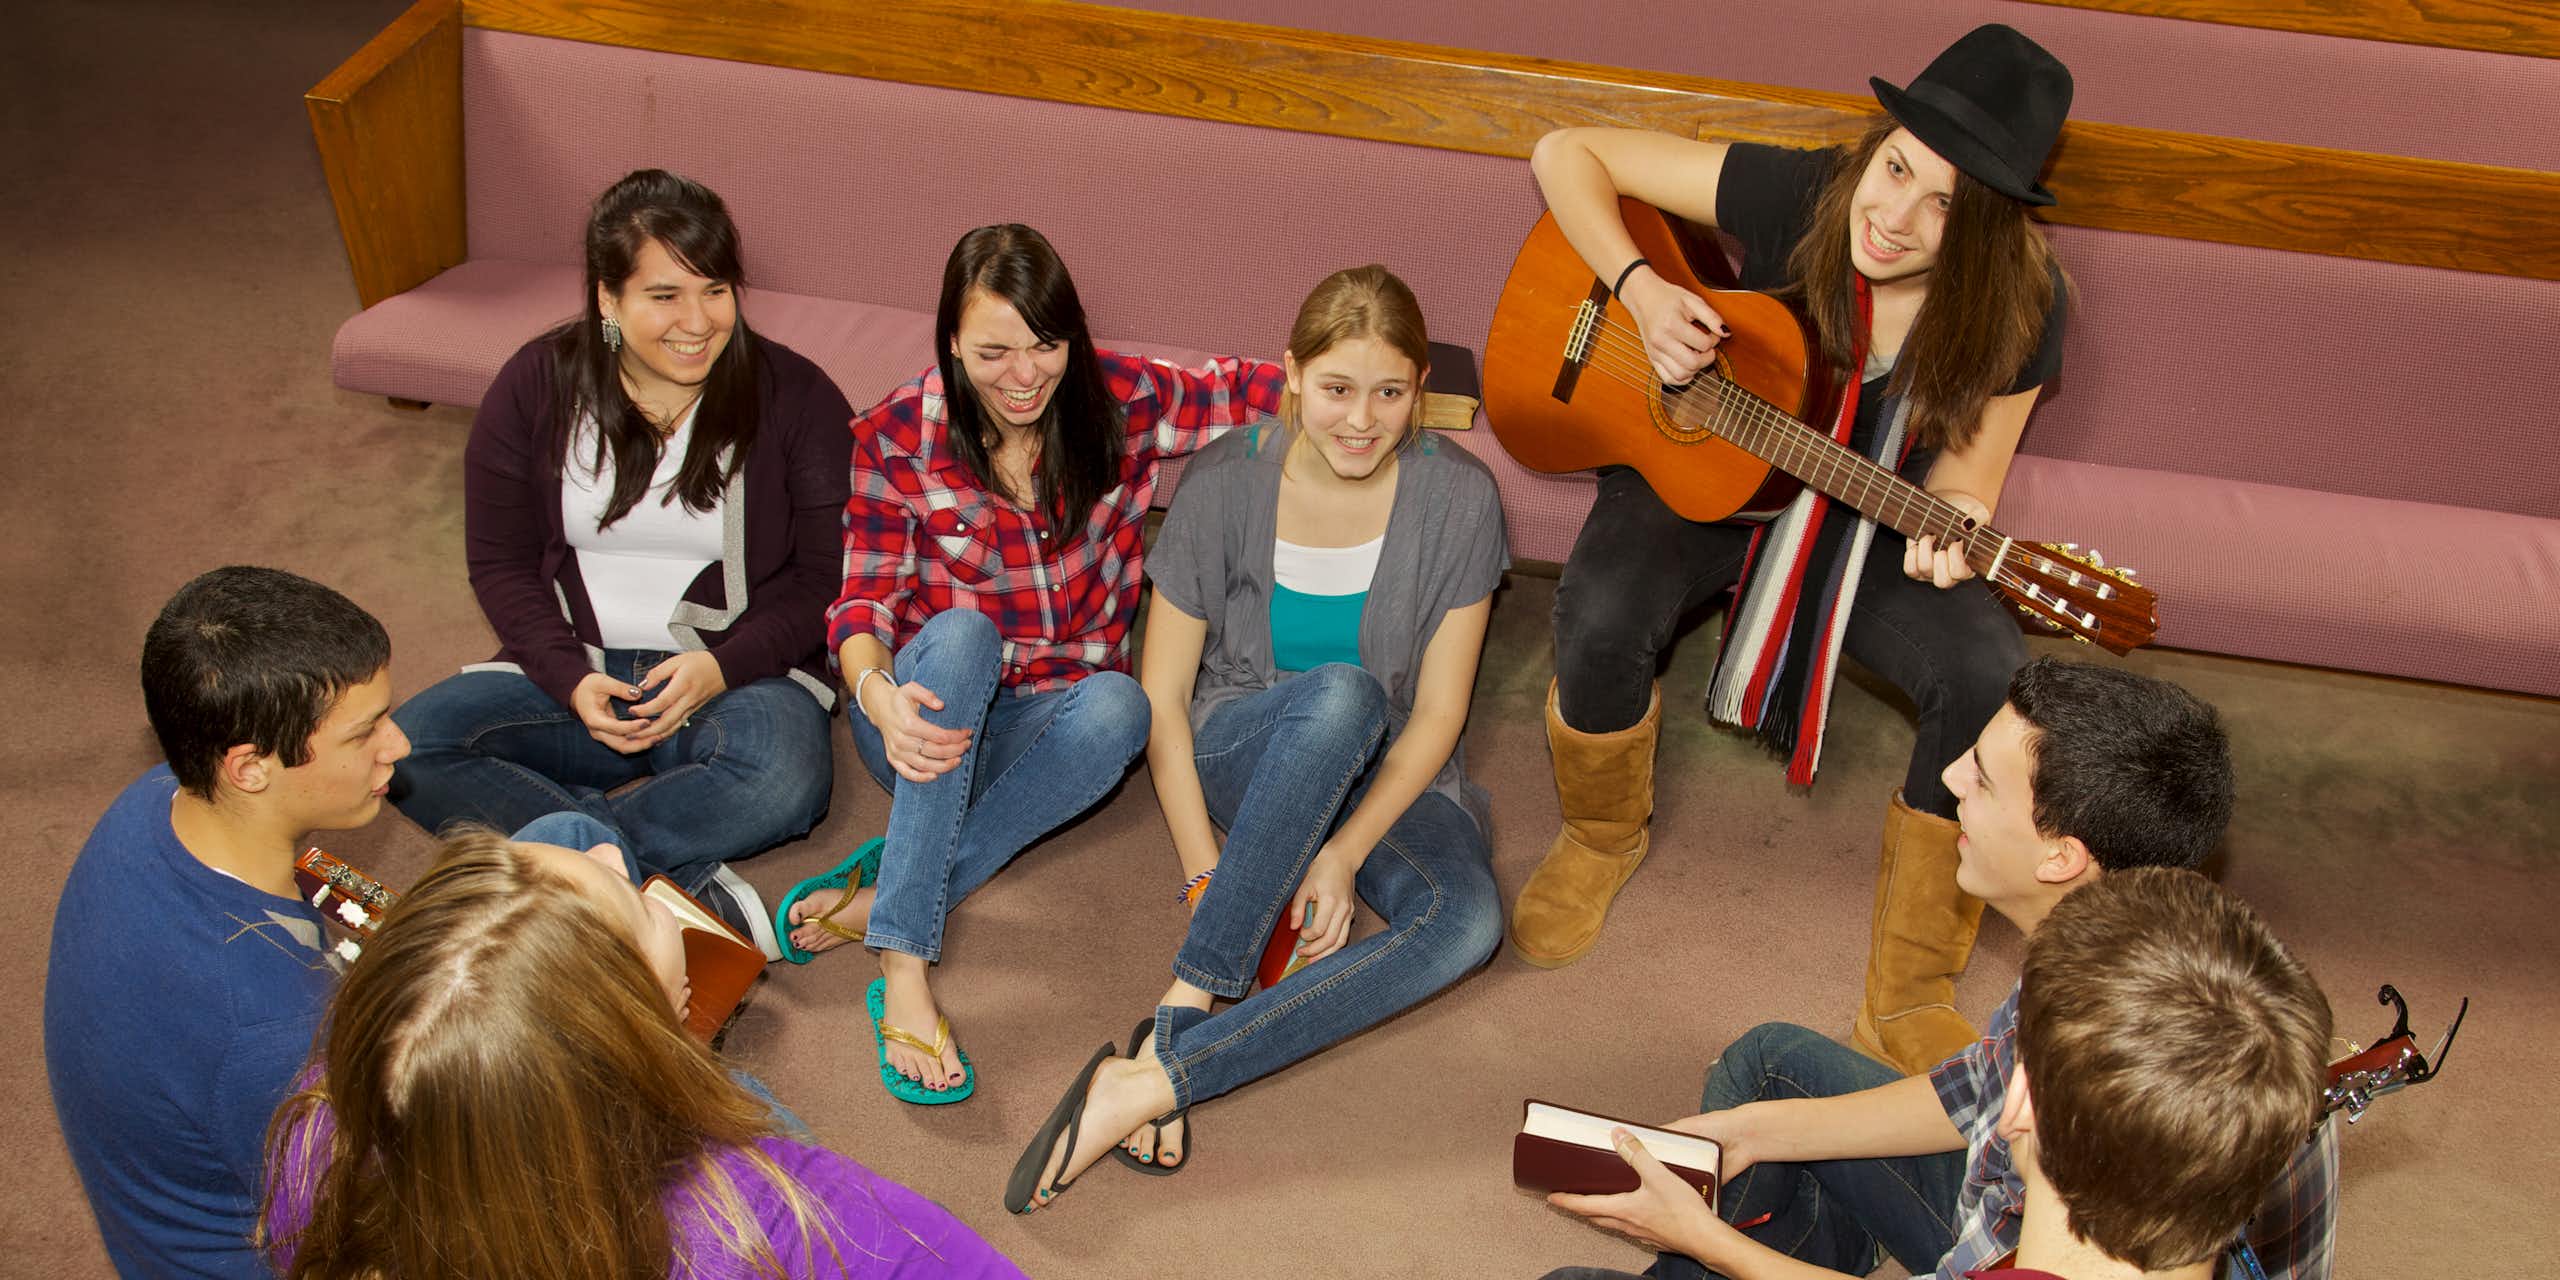 A group of young people sitting on the floor near church pews.